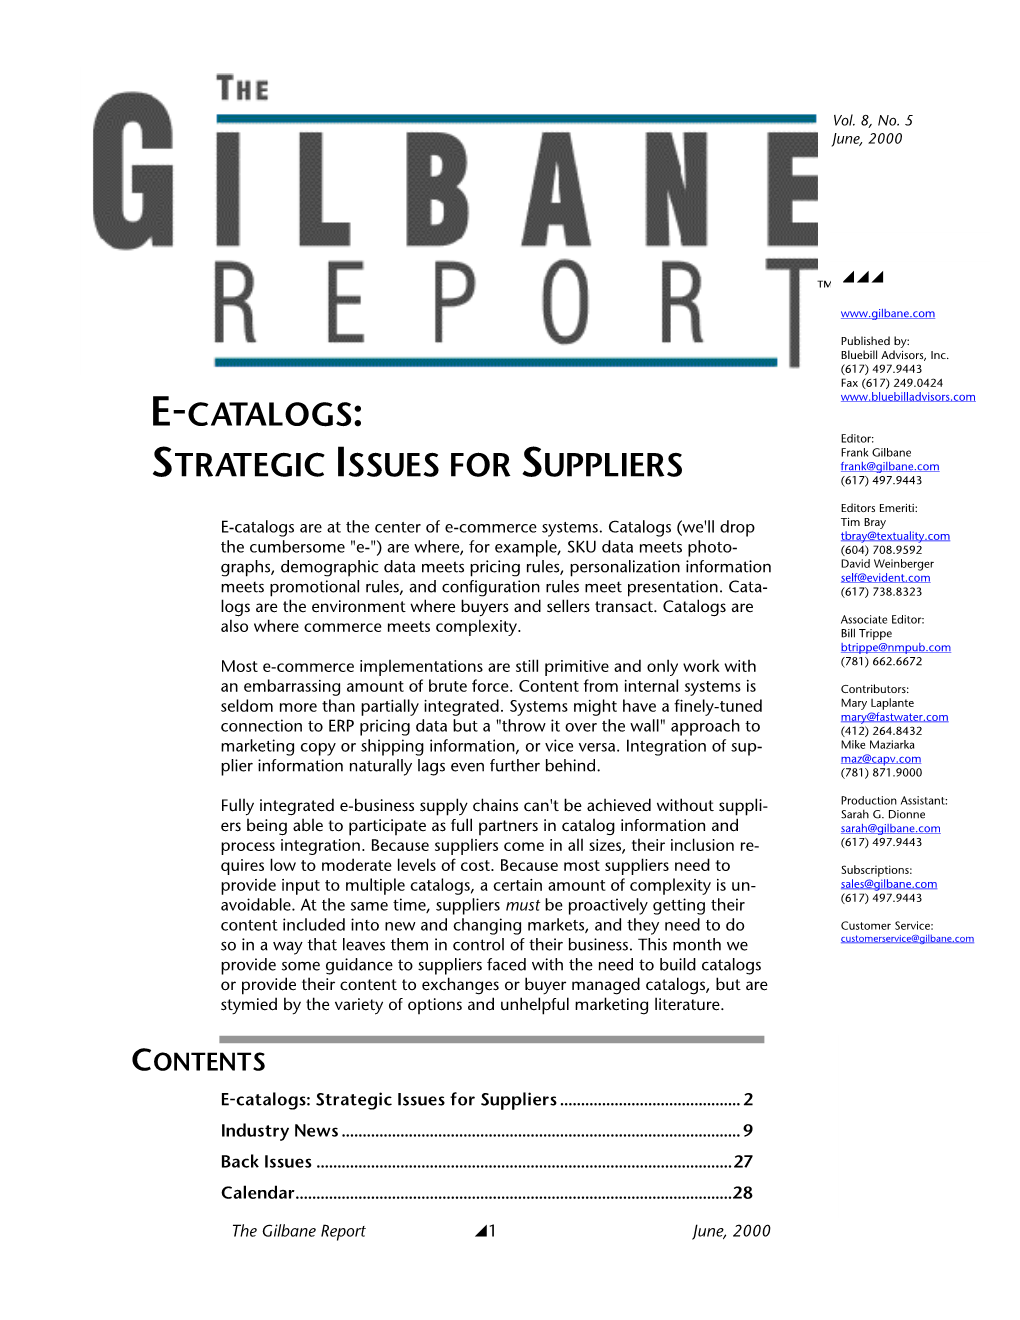 E-Catalogs: Strategic Issues for Suppliers